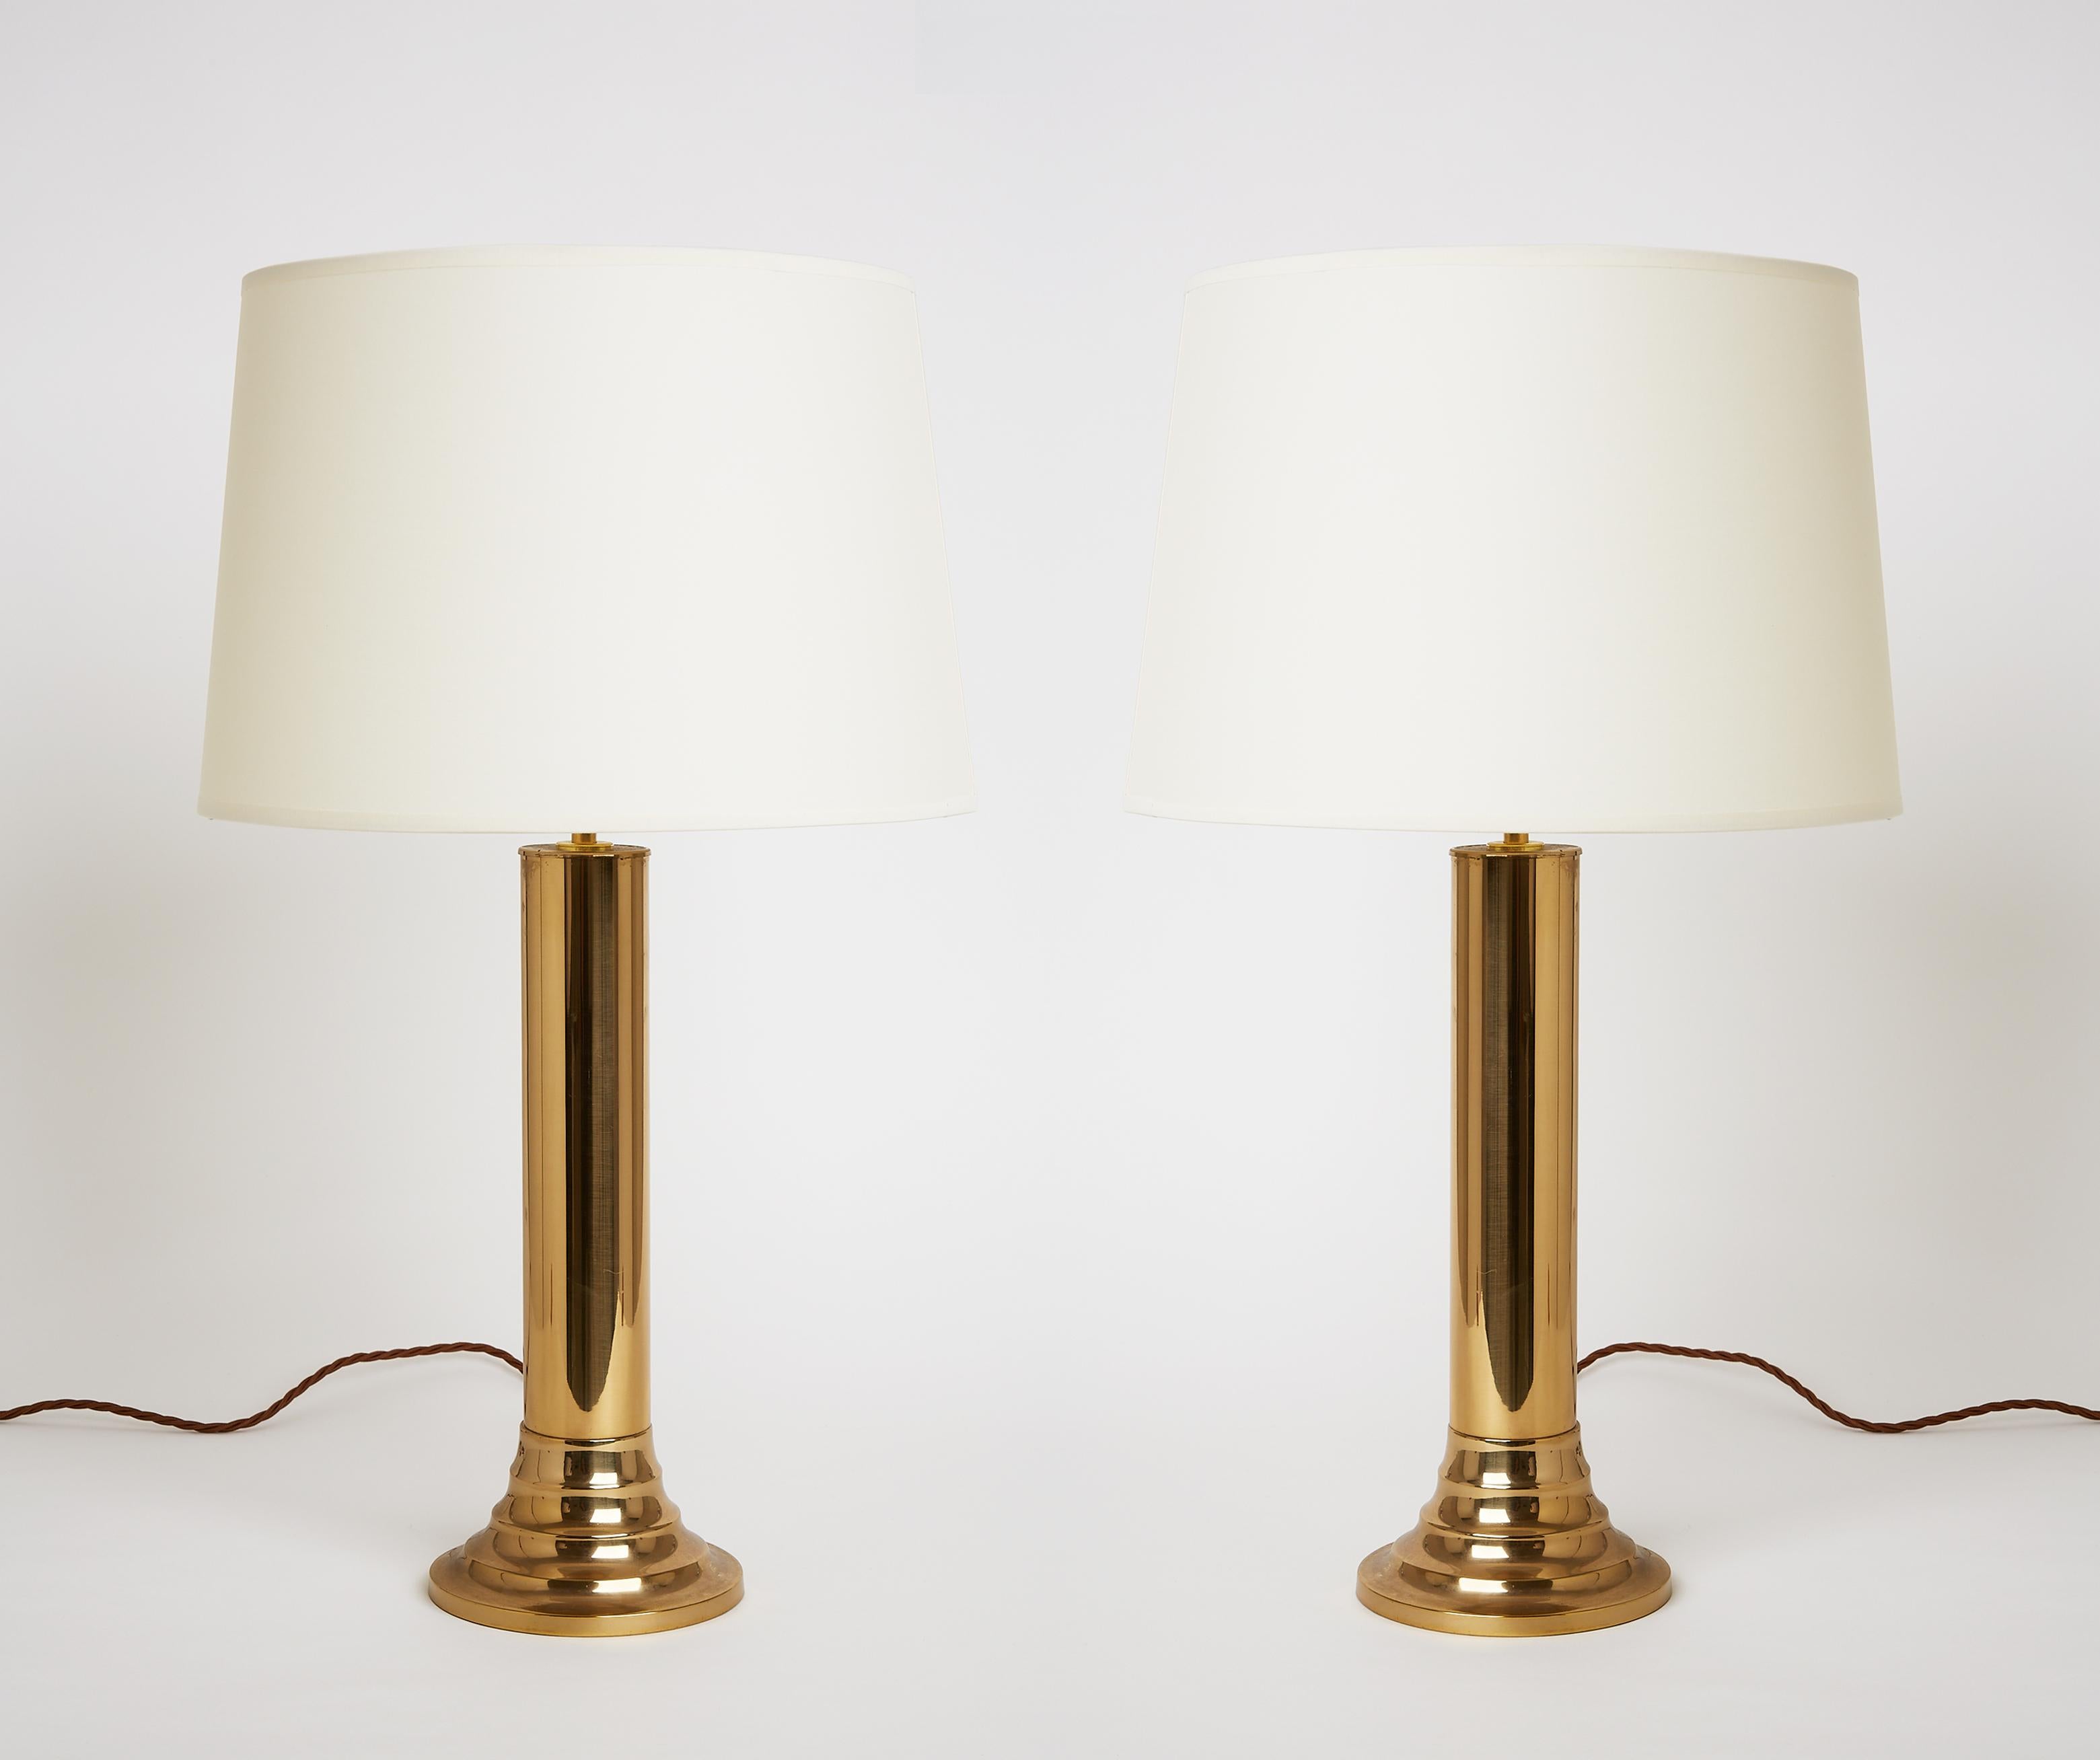 Pair of Midcentury Brass Table Lamps by Bergboms 1